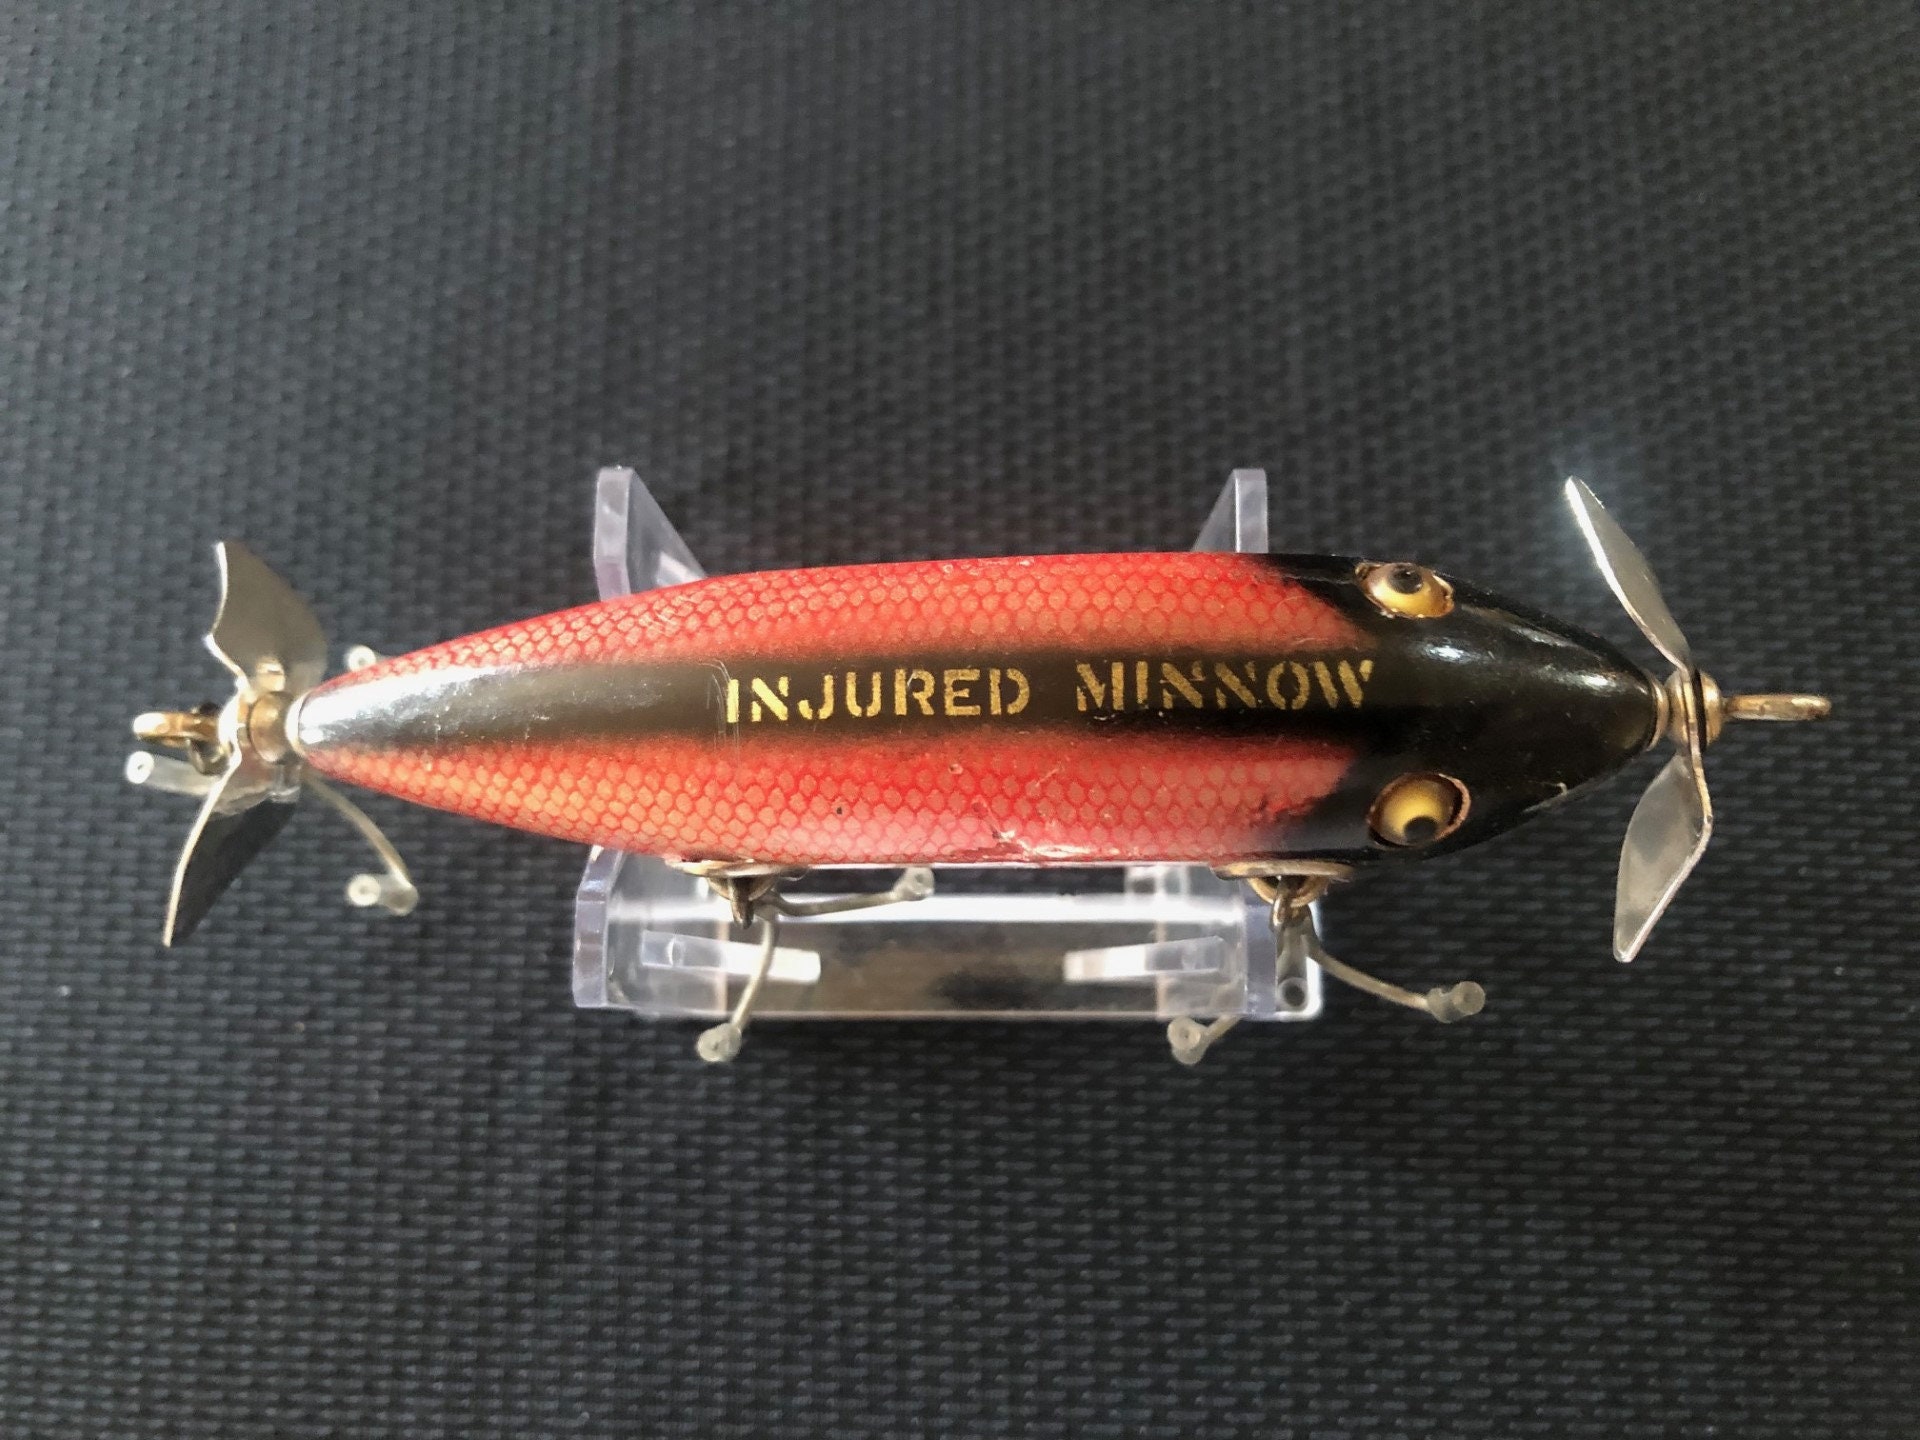 1960'S Creek Chub Injured Minnow 1505 Wooden With Glass Eyes Rare Color. 